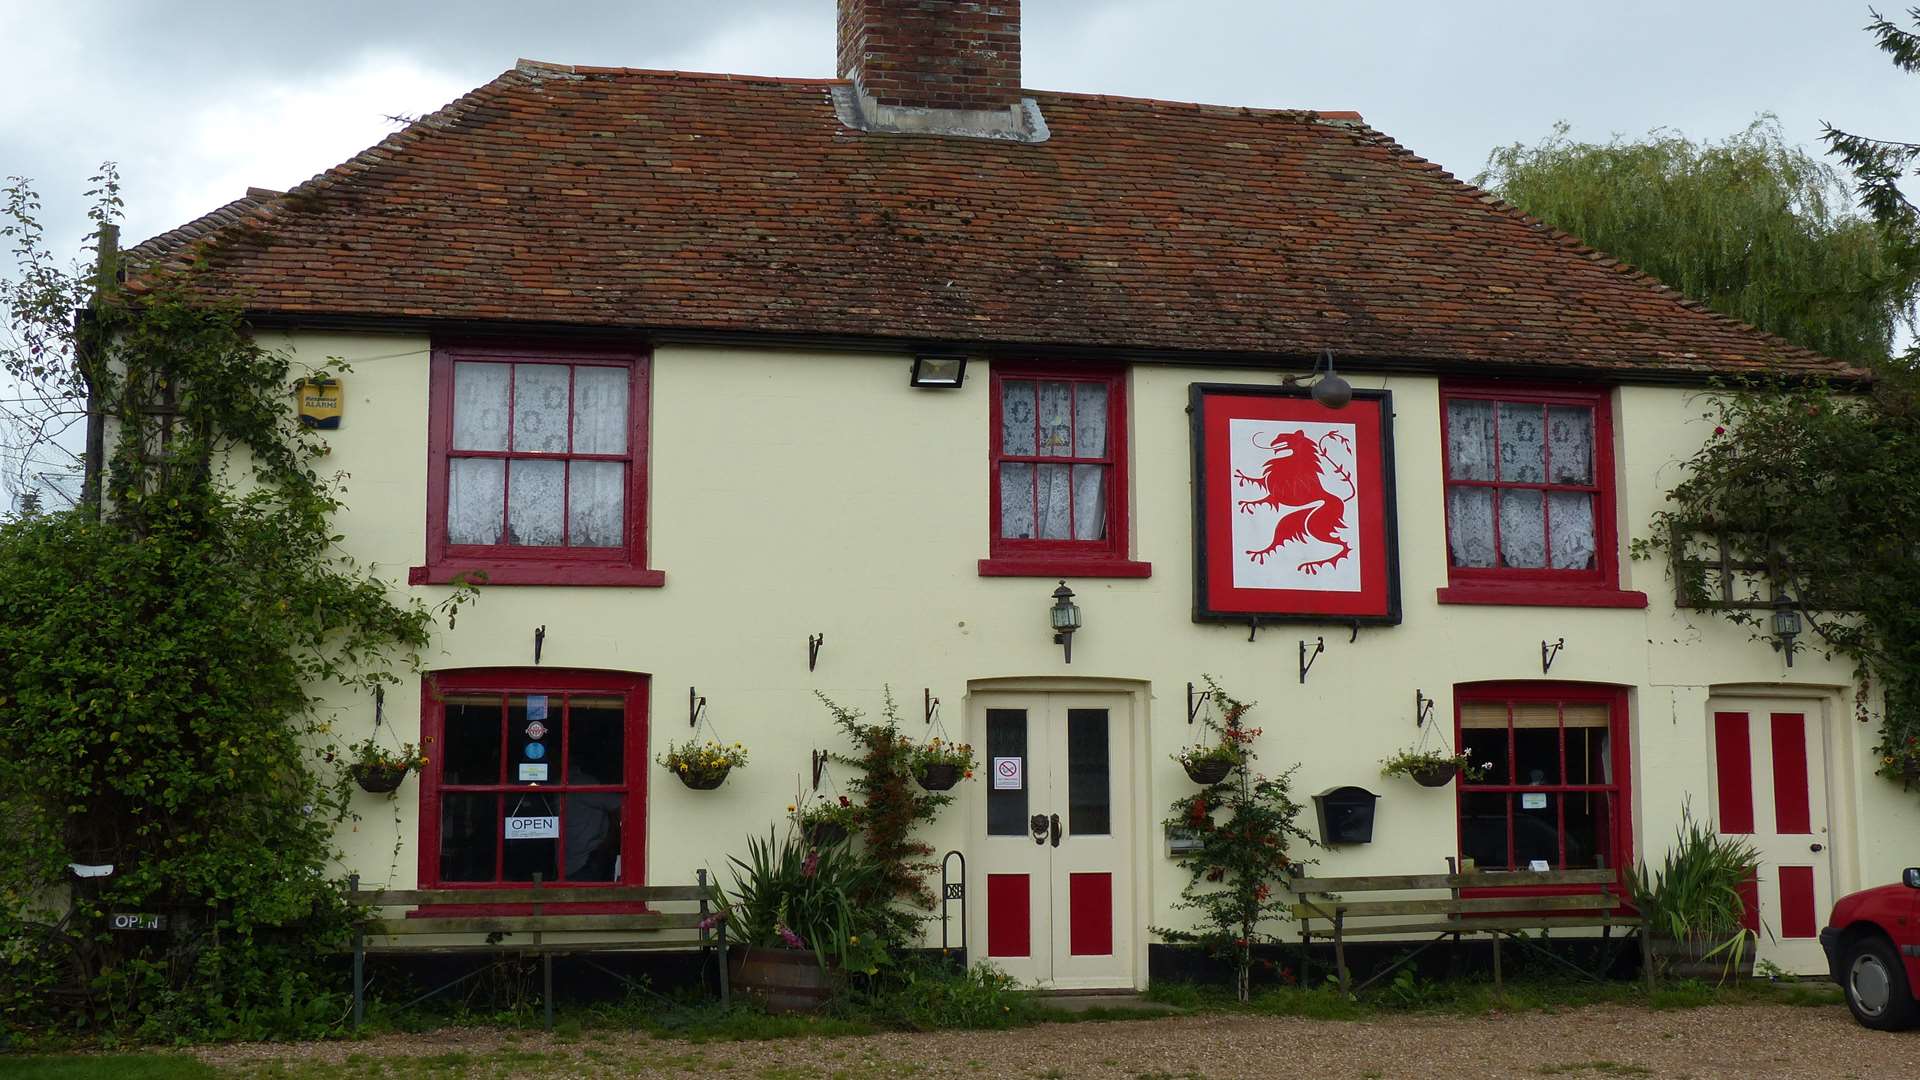 The Red Lion at Snargate